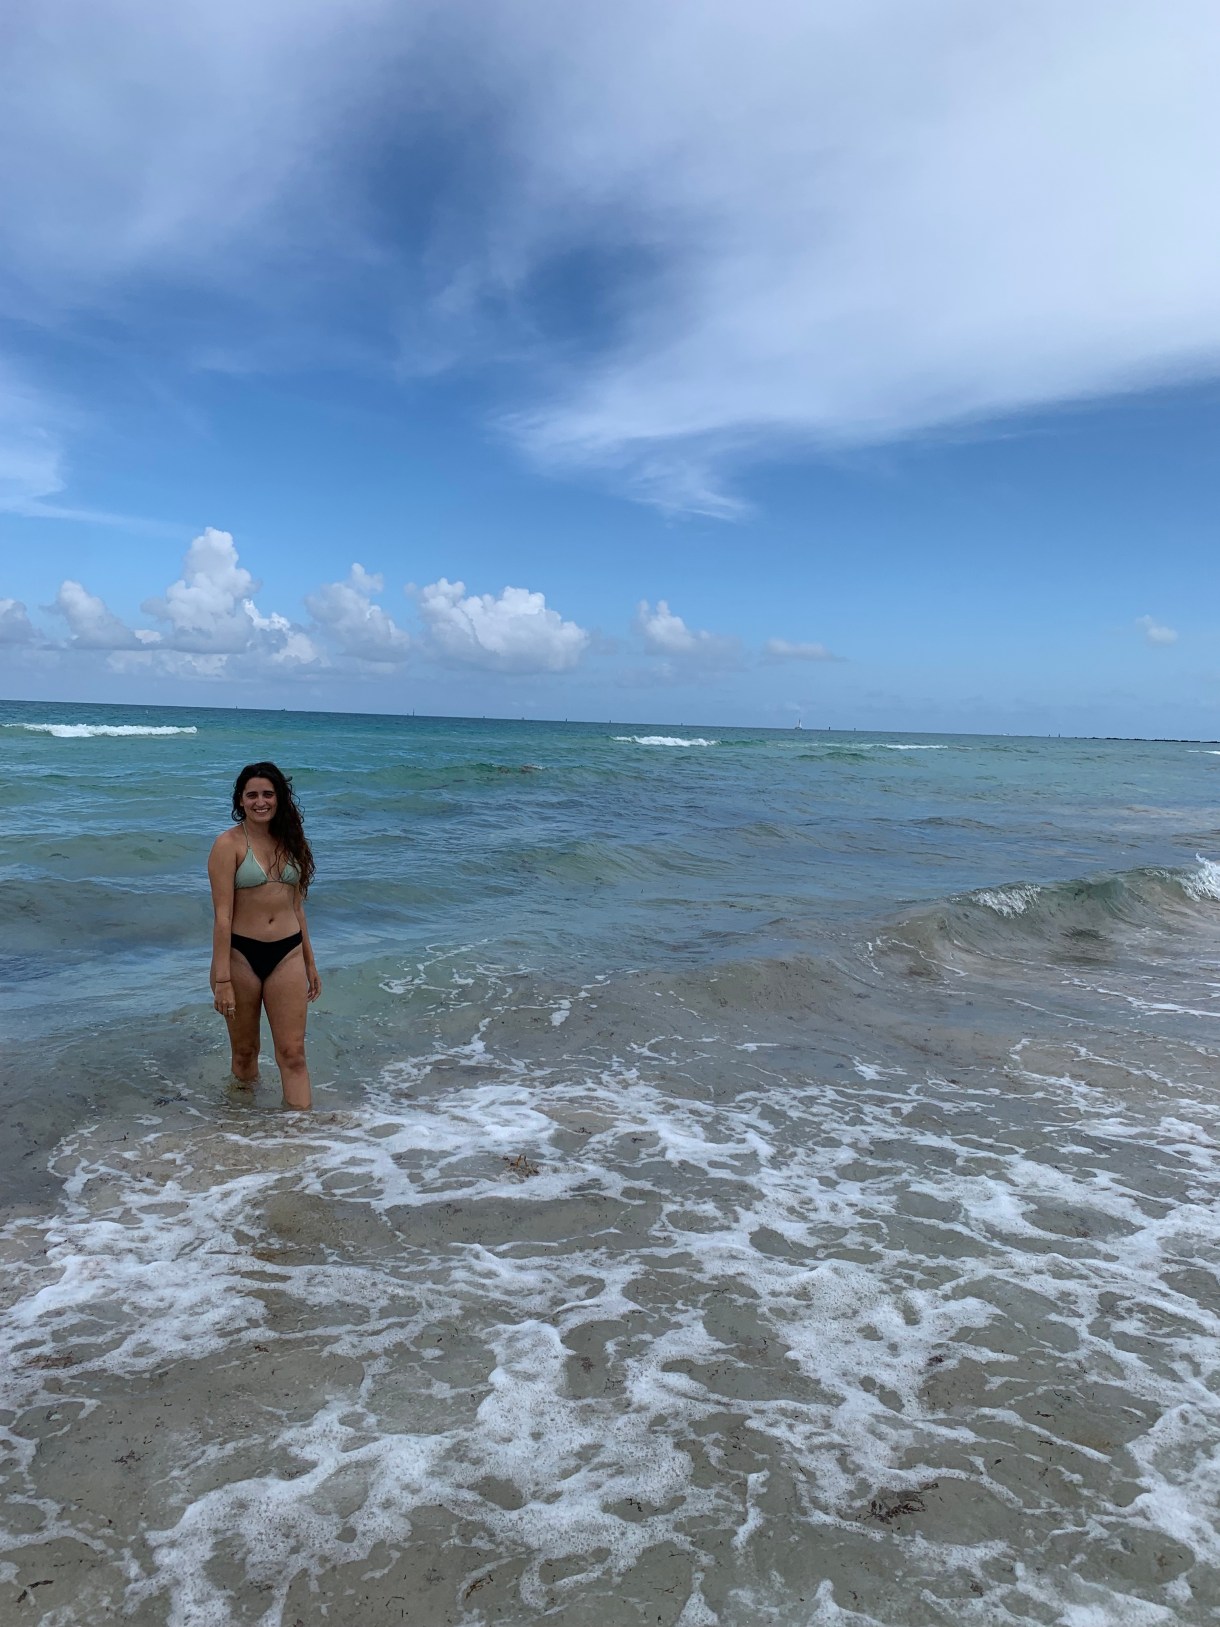 Kayla, a South Asian woman with long brown hair, stands in the ocean, wearing a bathing suit, on a semi-clowdy day.